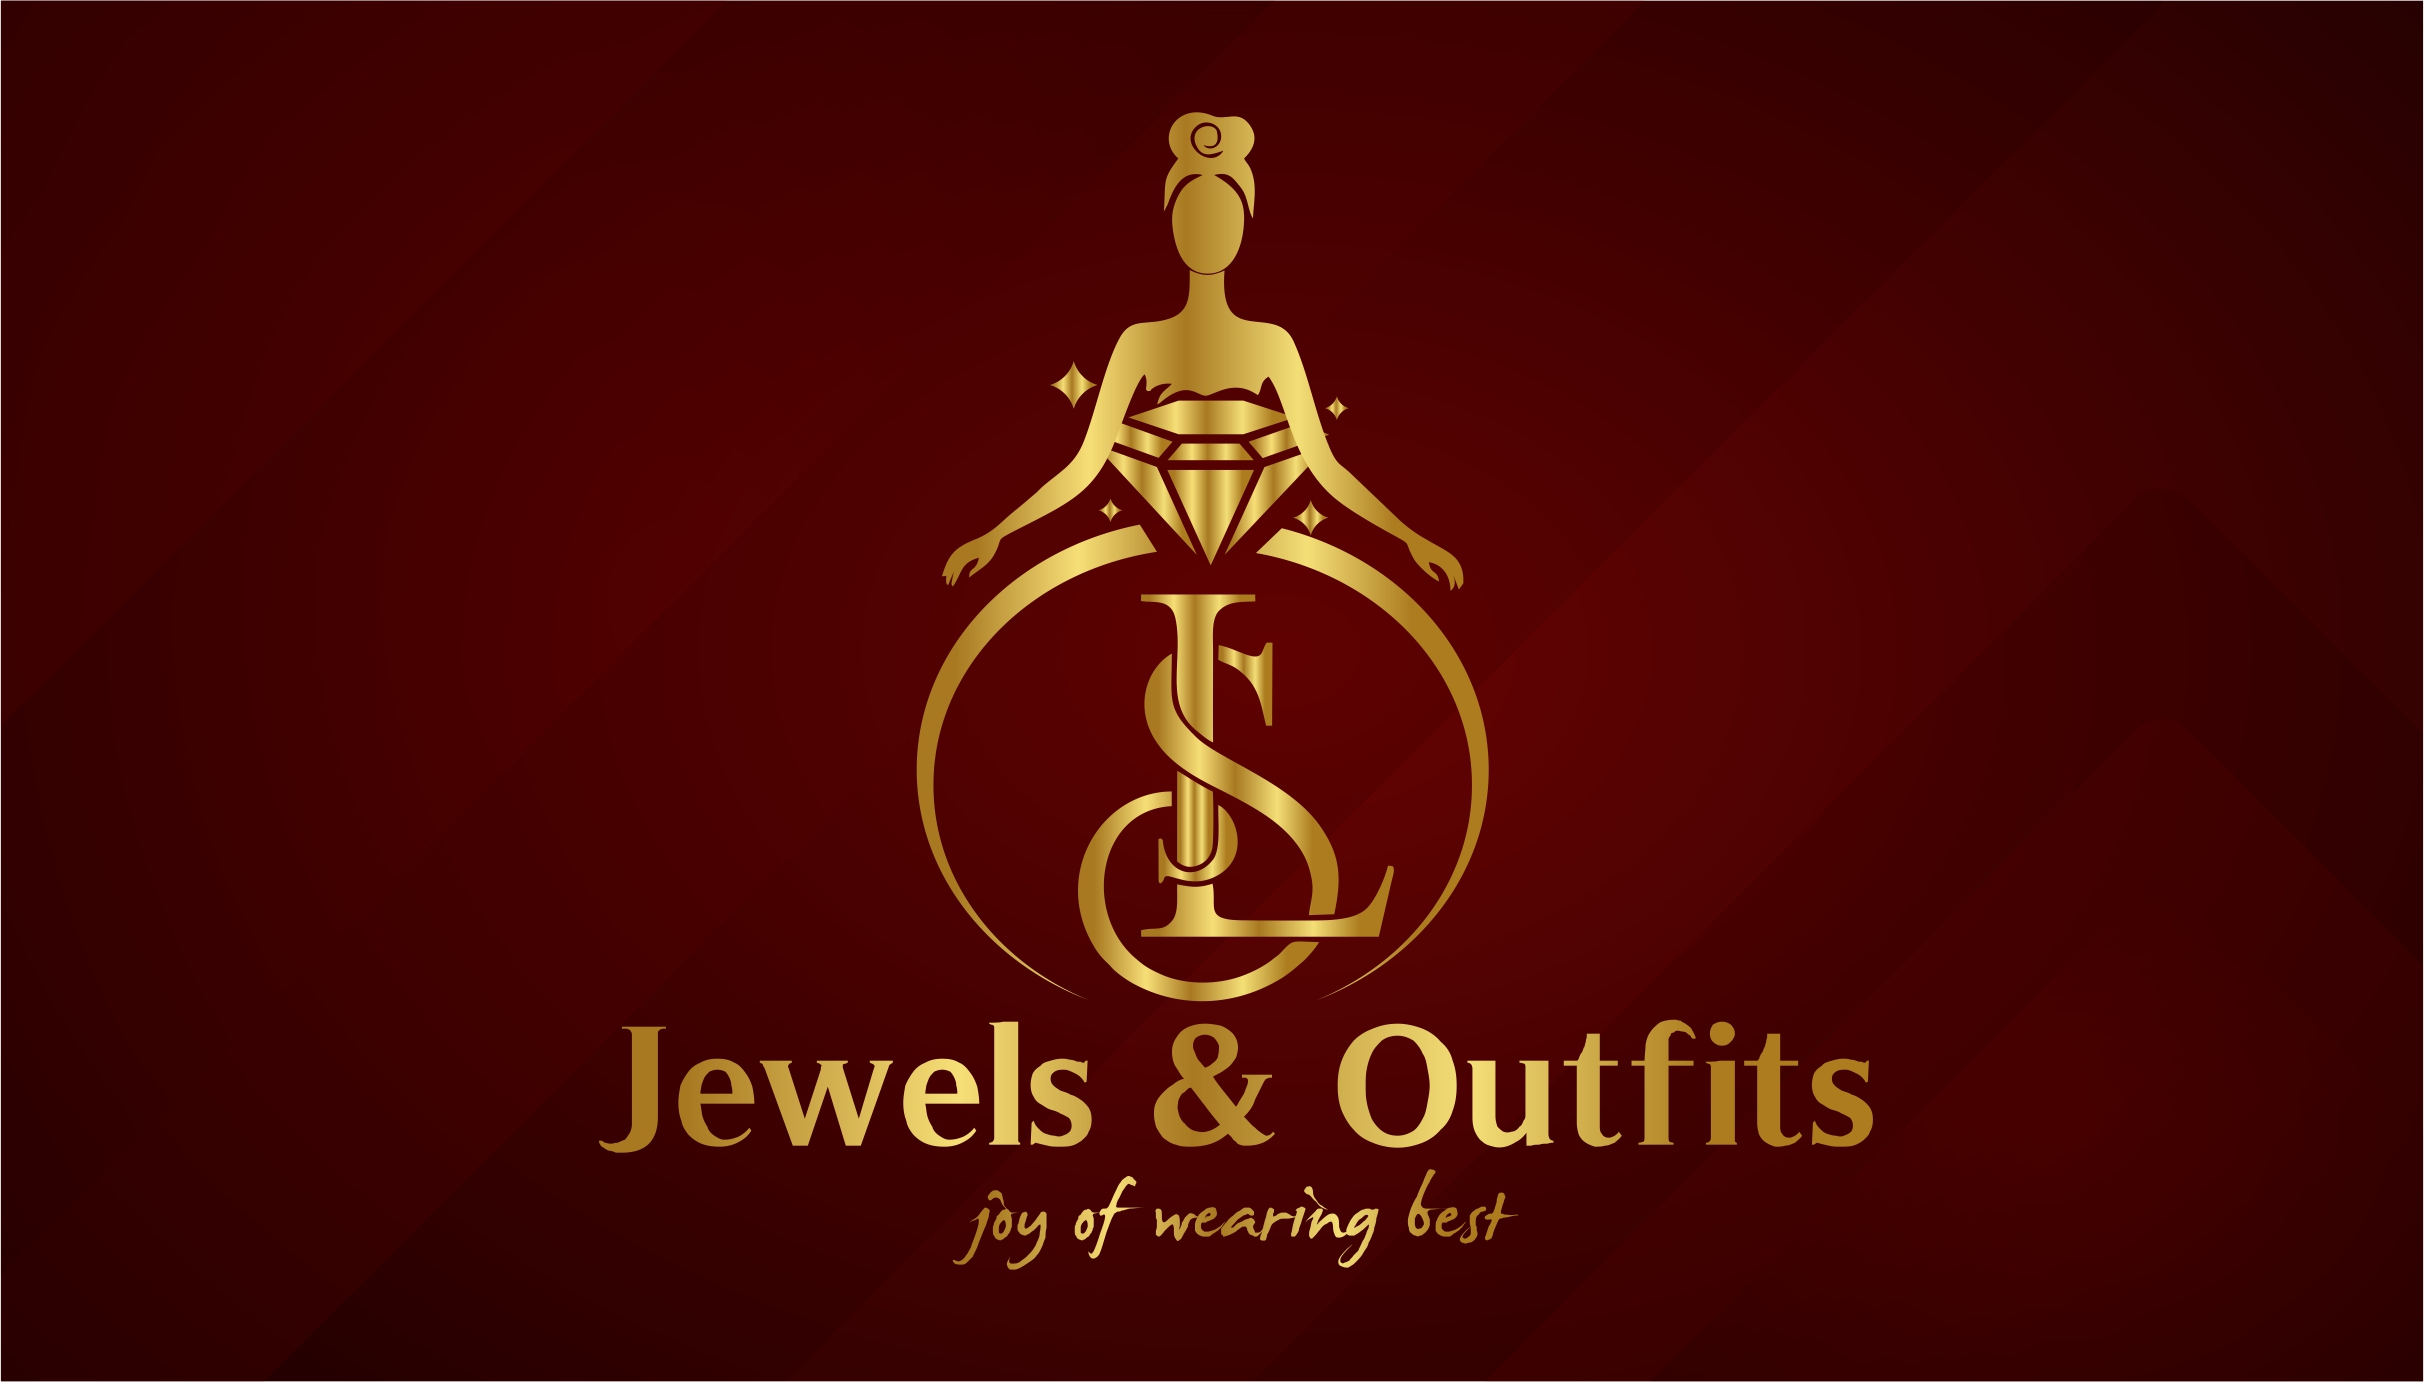 L.S Jewels & Outfits